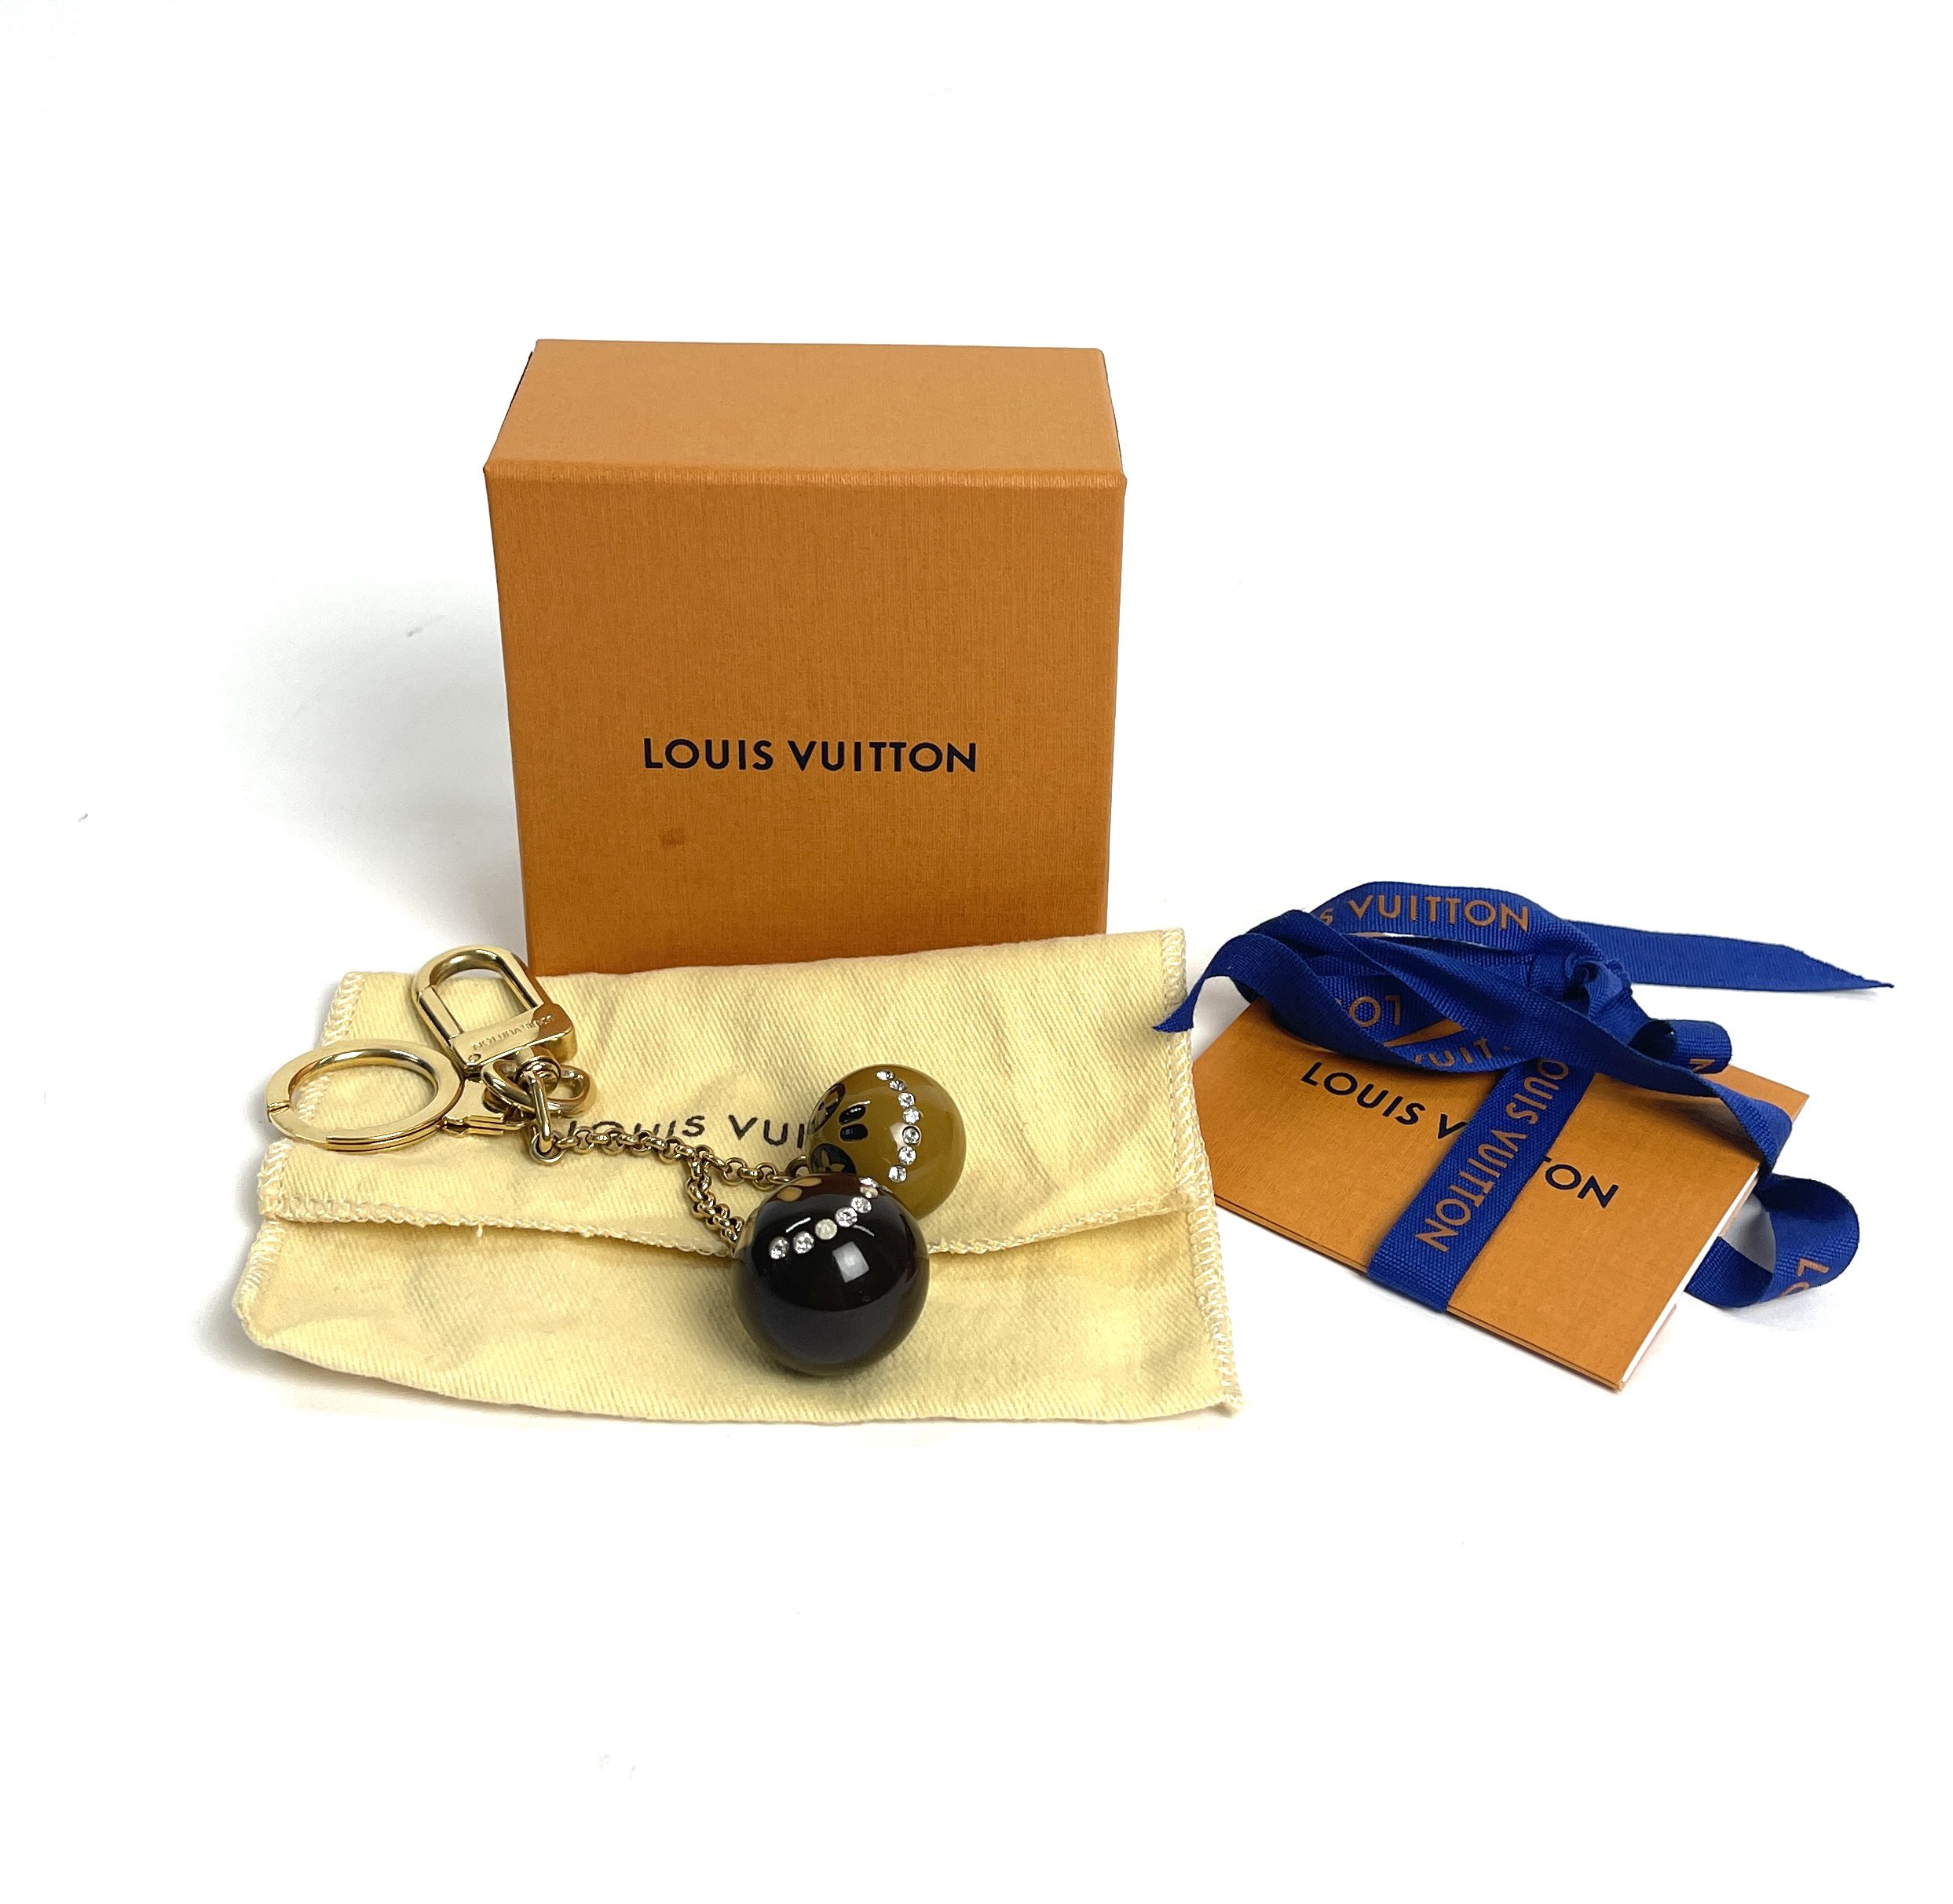 Louis Vuitton, Accessories, Louis Vuitton Small Gift Box And Dust Bag